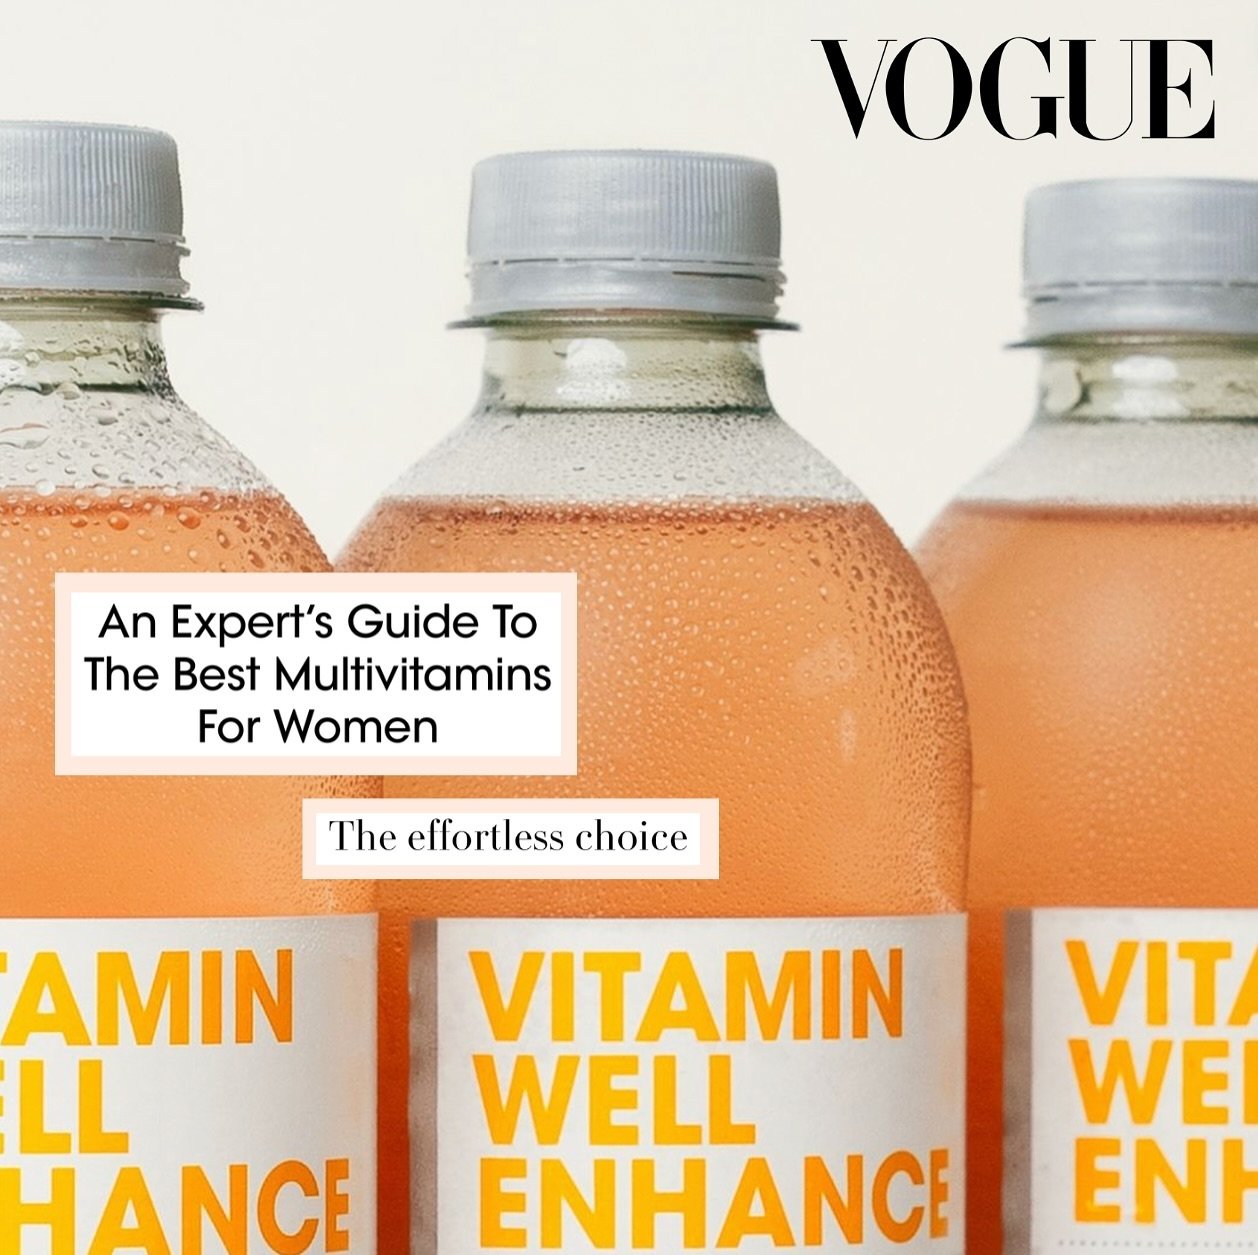 @vitaminwell_uk Hydrate and Enhance featured in VOGUE 💦⭐️ @britishvogue - the effortless choice